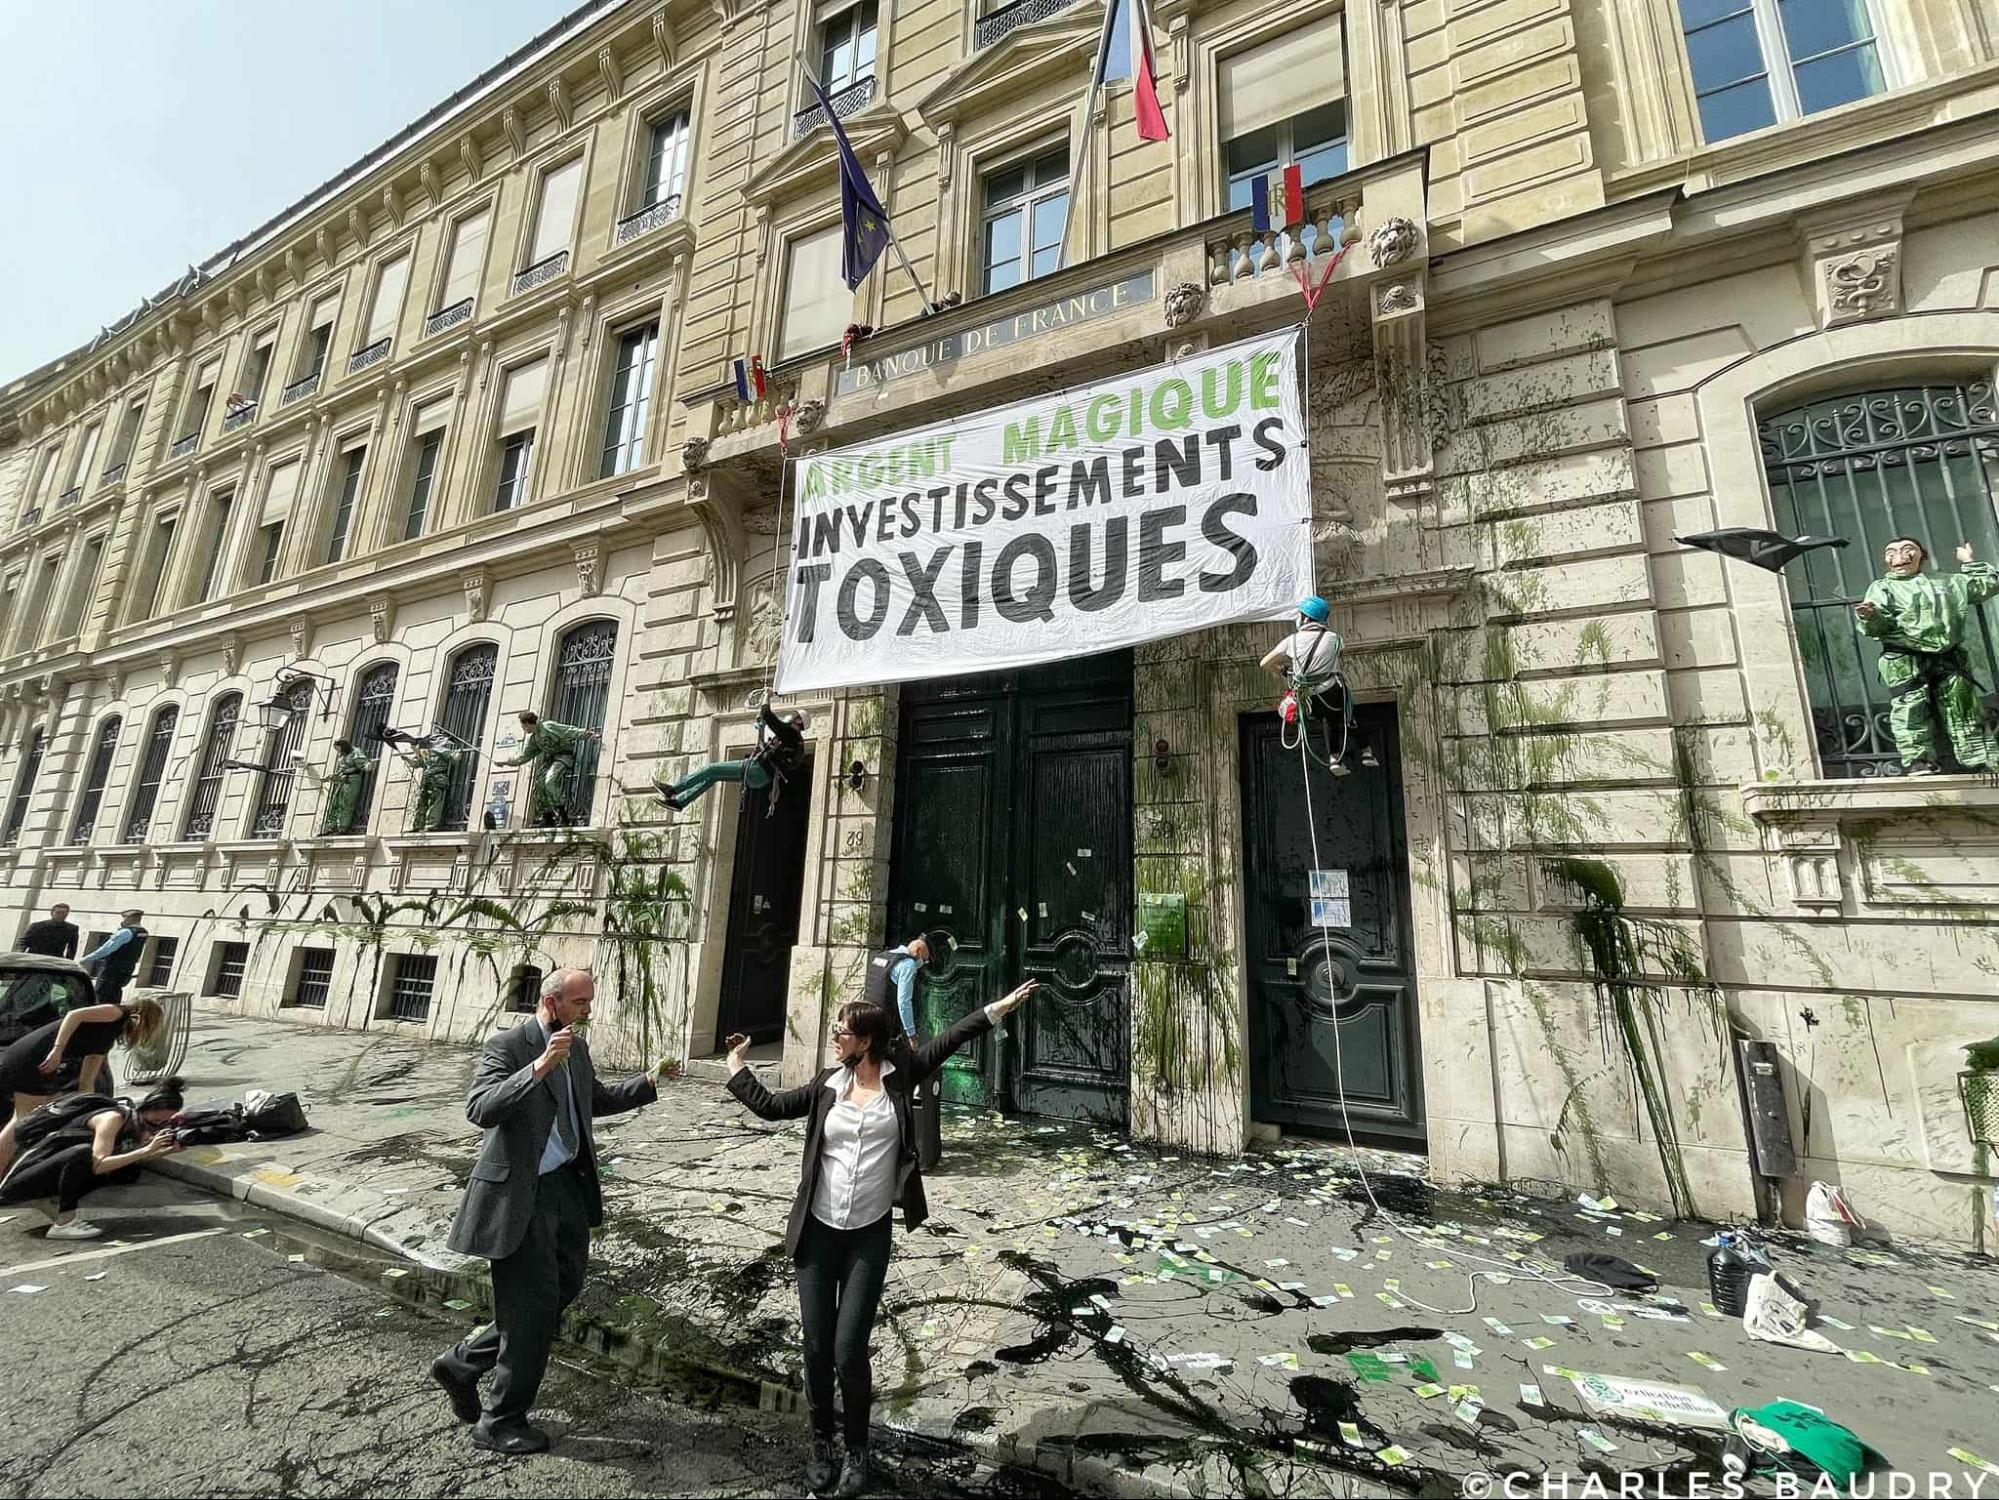 Paris, France. The Bank of France gets a makeover to match its dirty oil investments.